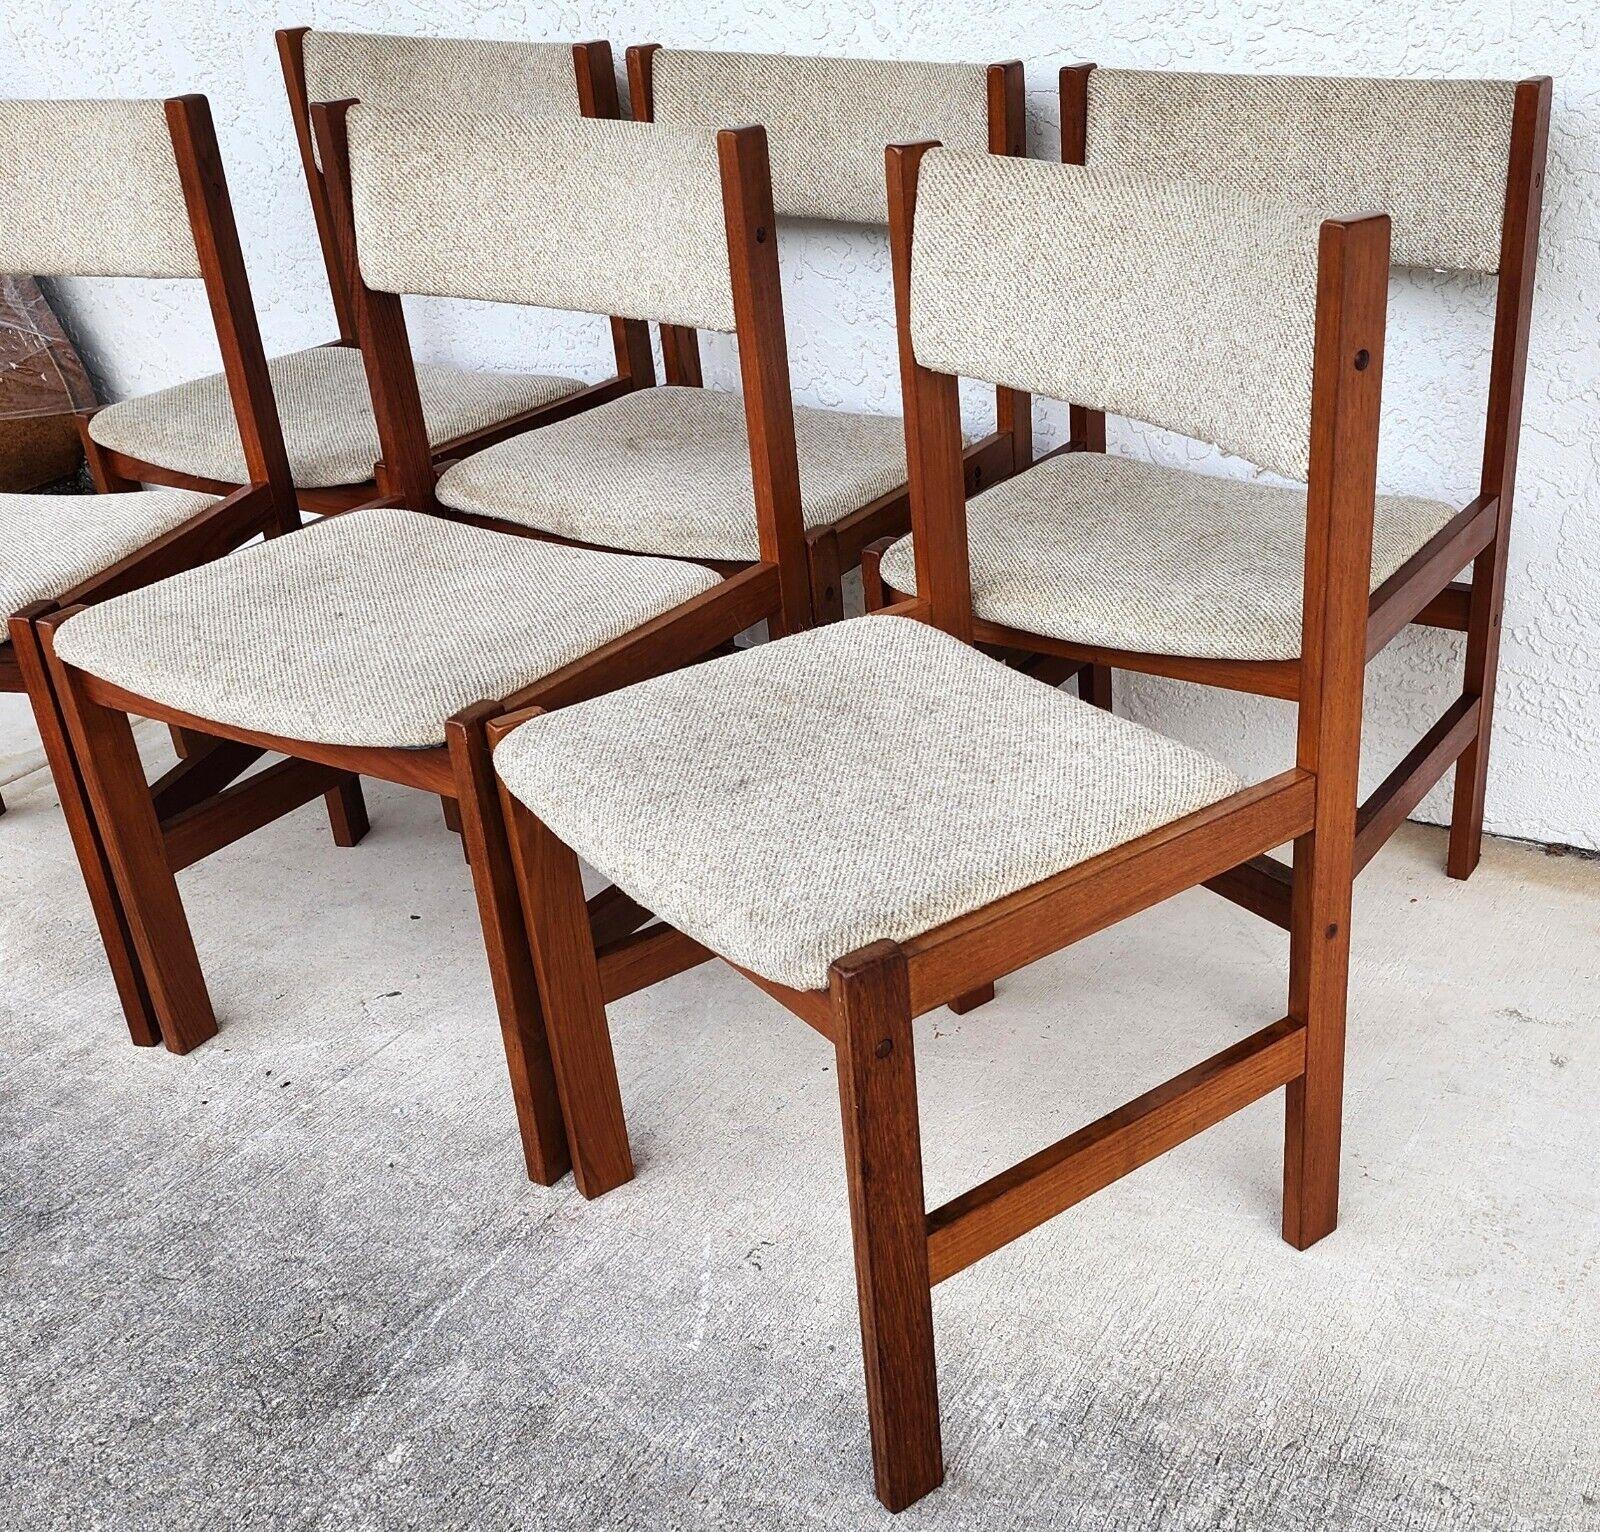 For FULL item description click on CONTINUE READING at the bottom of this page.

Offering One Of Our Recent Palm Beach Estate Fine Furniture Acquisitions Of A
Set of 6 MCM Solid Teak Dining Chairs Scandinavian Modern by Sun Furniture

Approximate